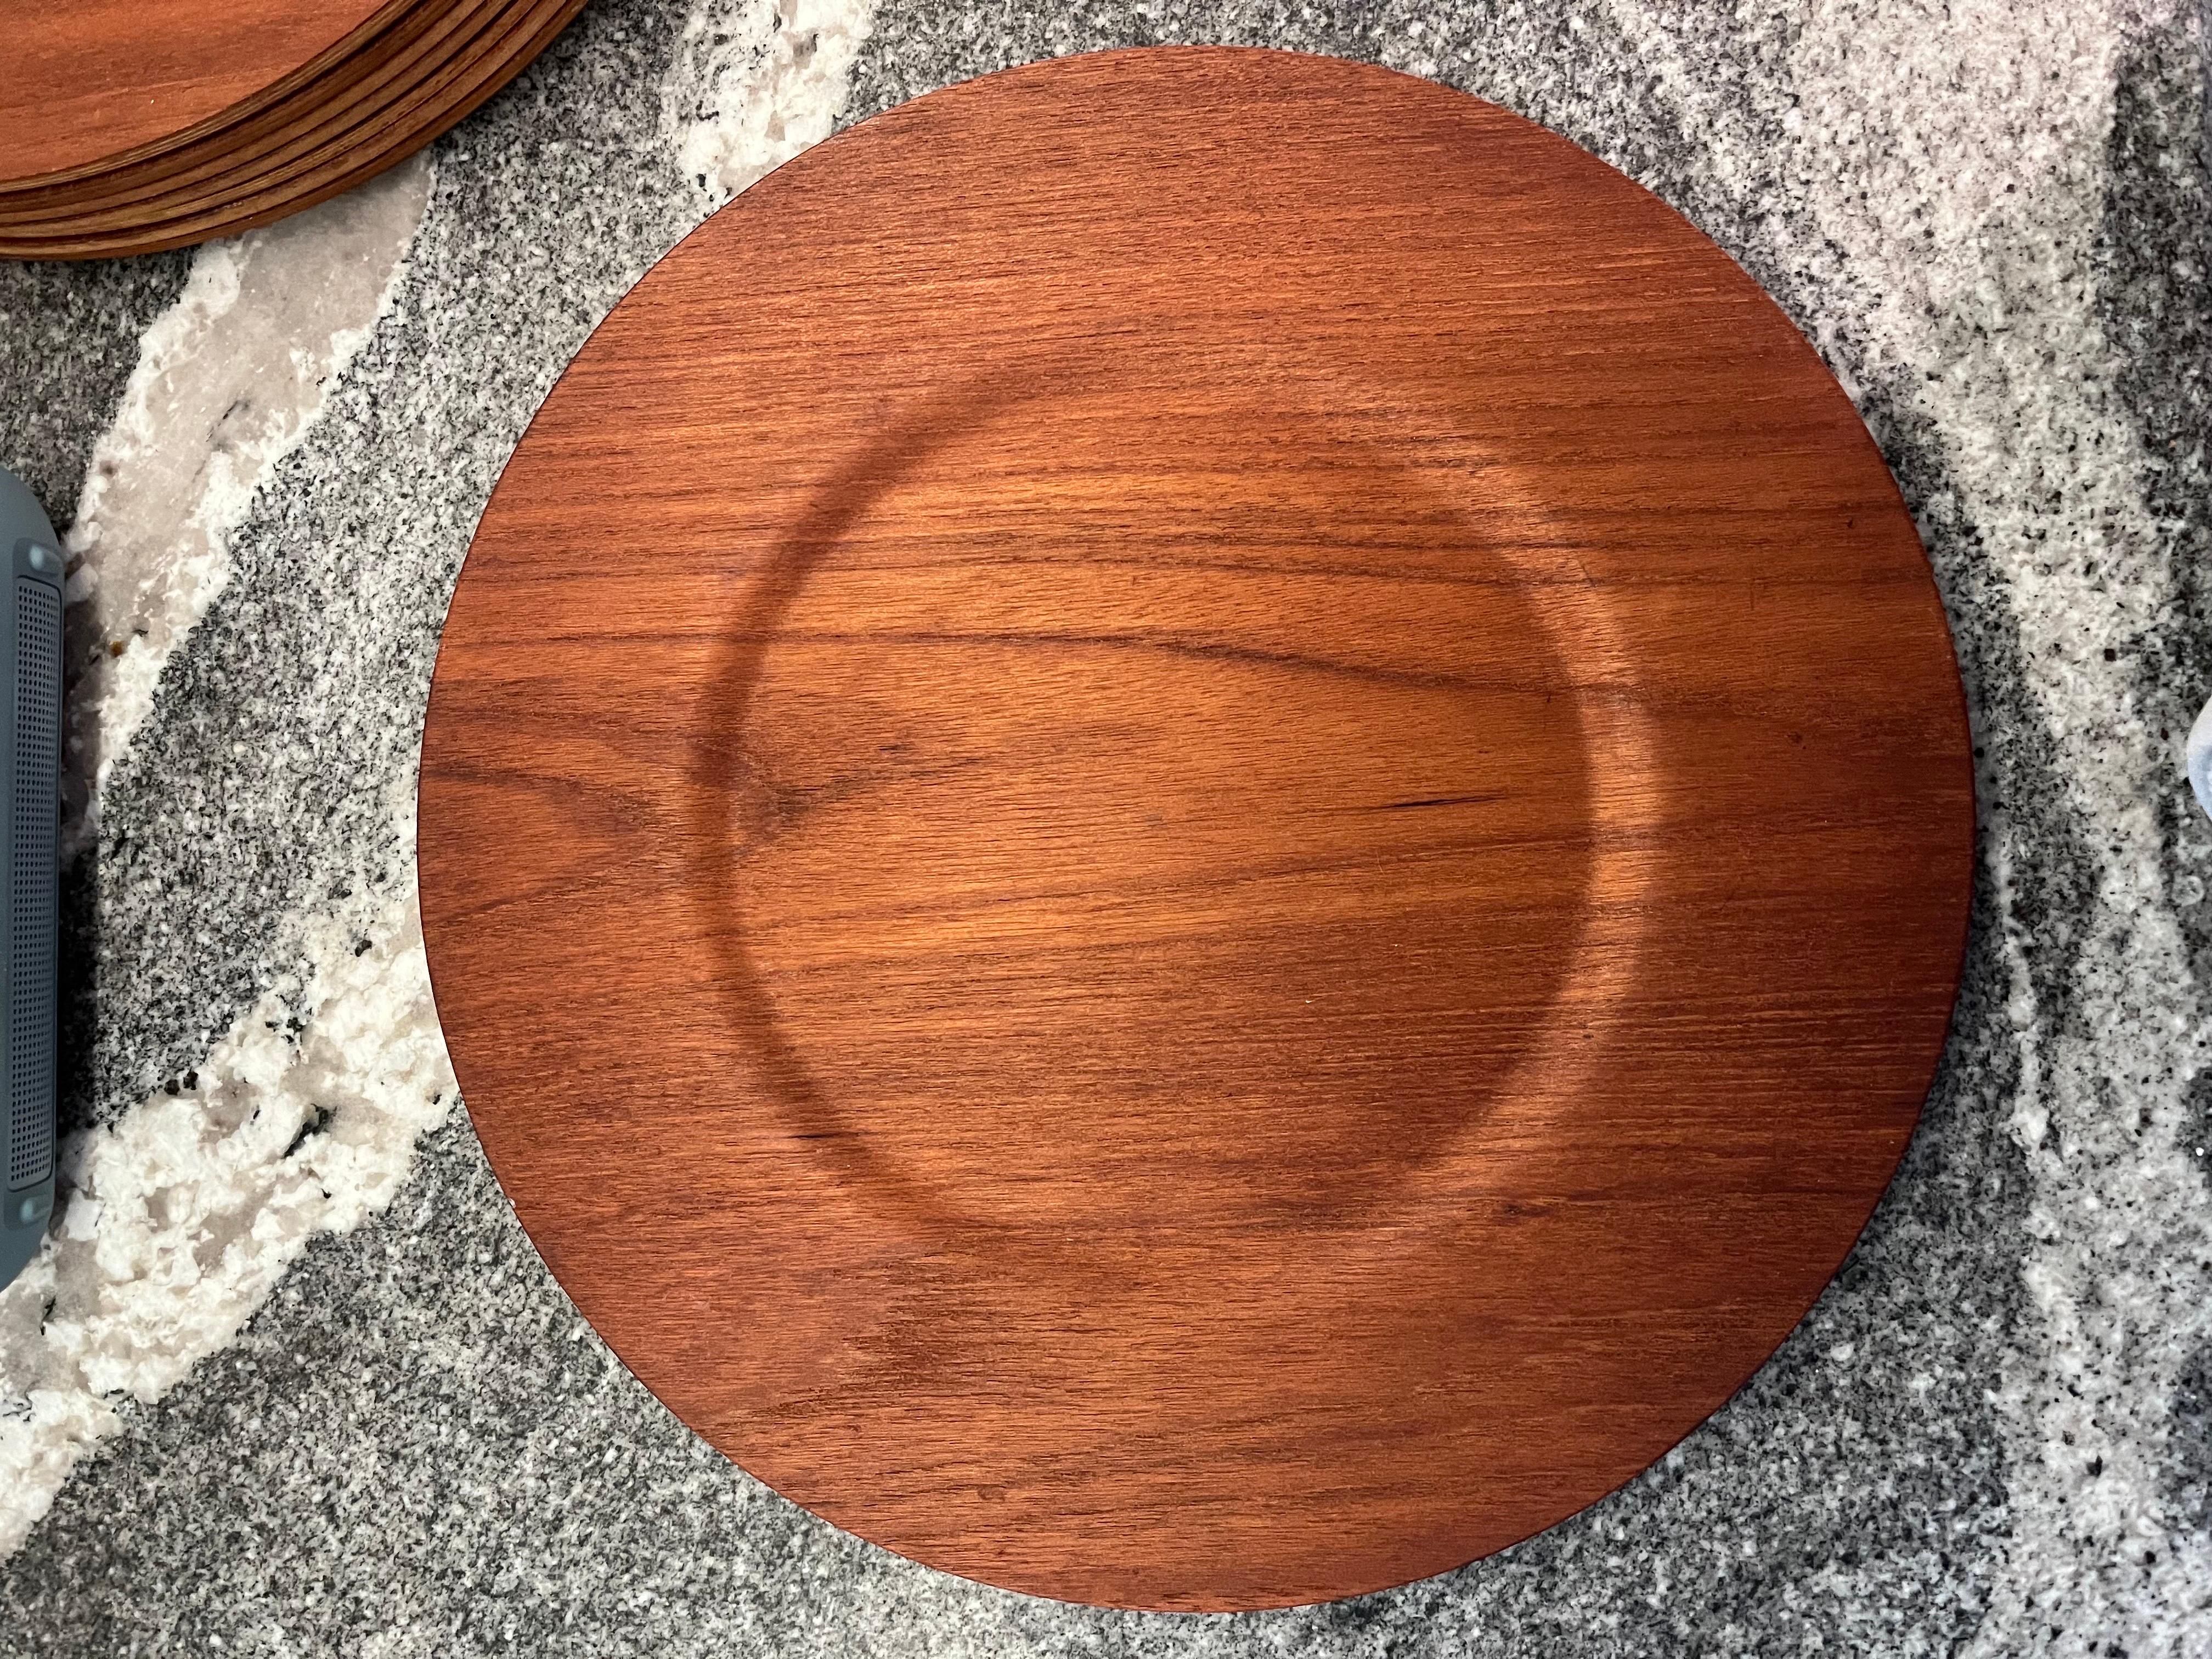 Set of 8 teak chargers or plates circa late 1960s. Nordika out of Sweden. These all original examples are in excellent vintage condition. Beautiful grain. Price listed is for the set of 8.